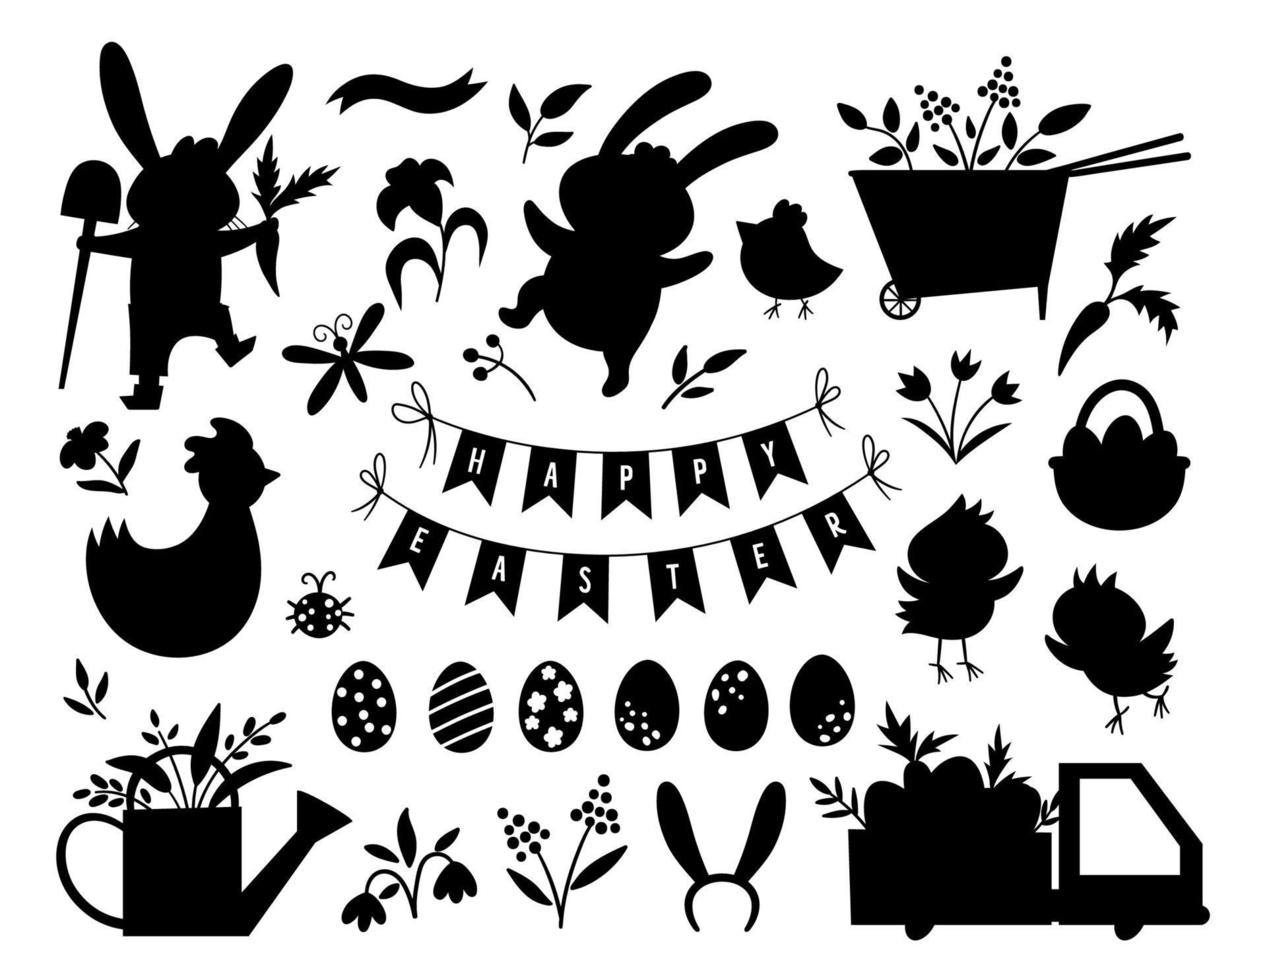 Vector Easter silhouettes set. Vector pack with cute bunny, eggs, bird, chicks, basket black shadows. Spring funny illustration. Adorable holiday icons collection